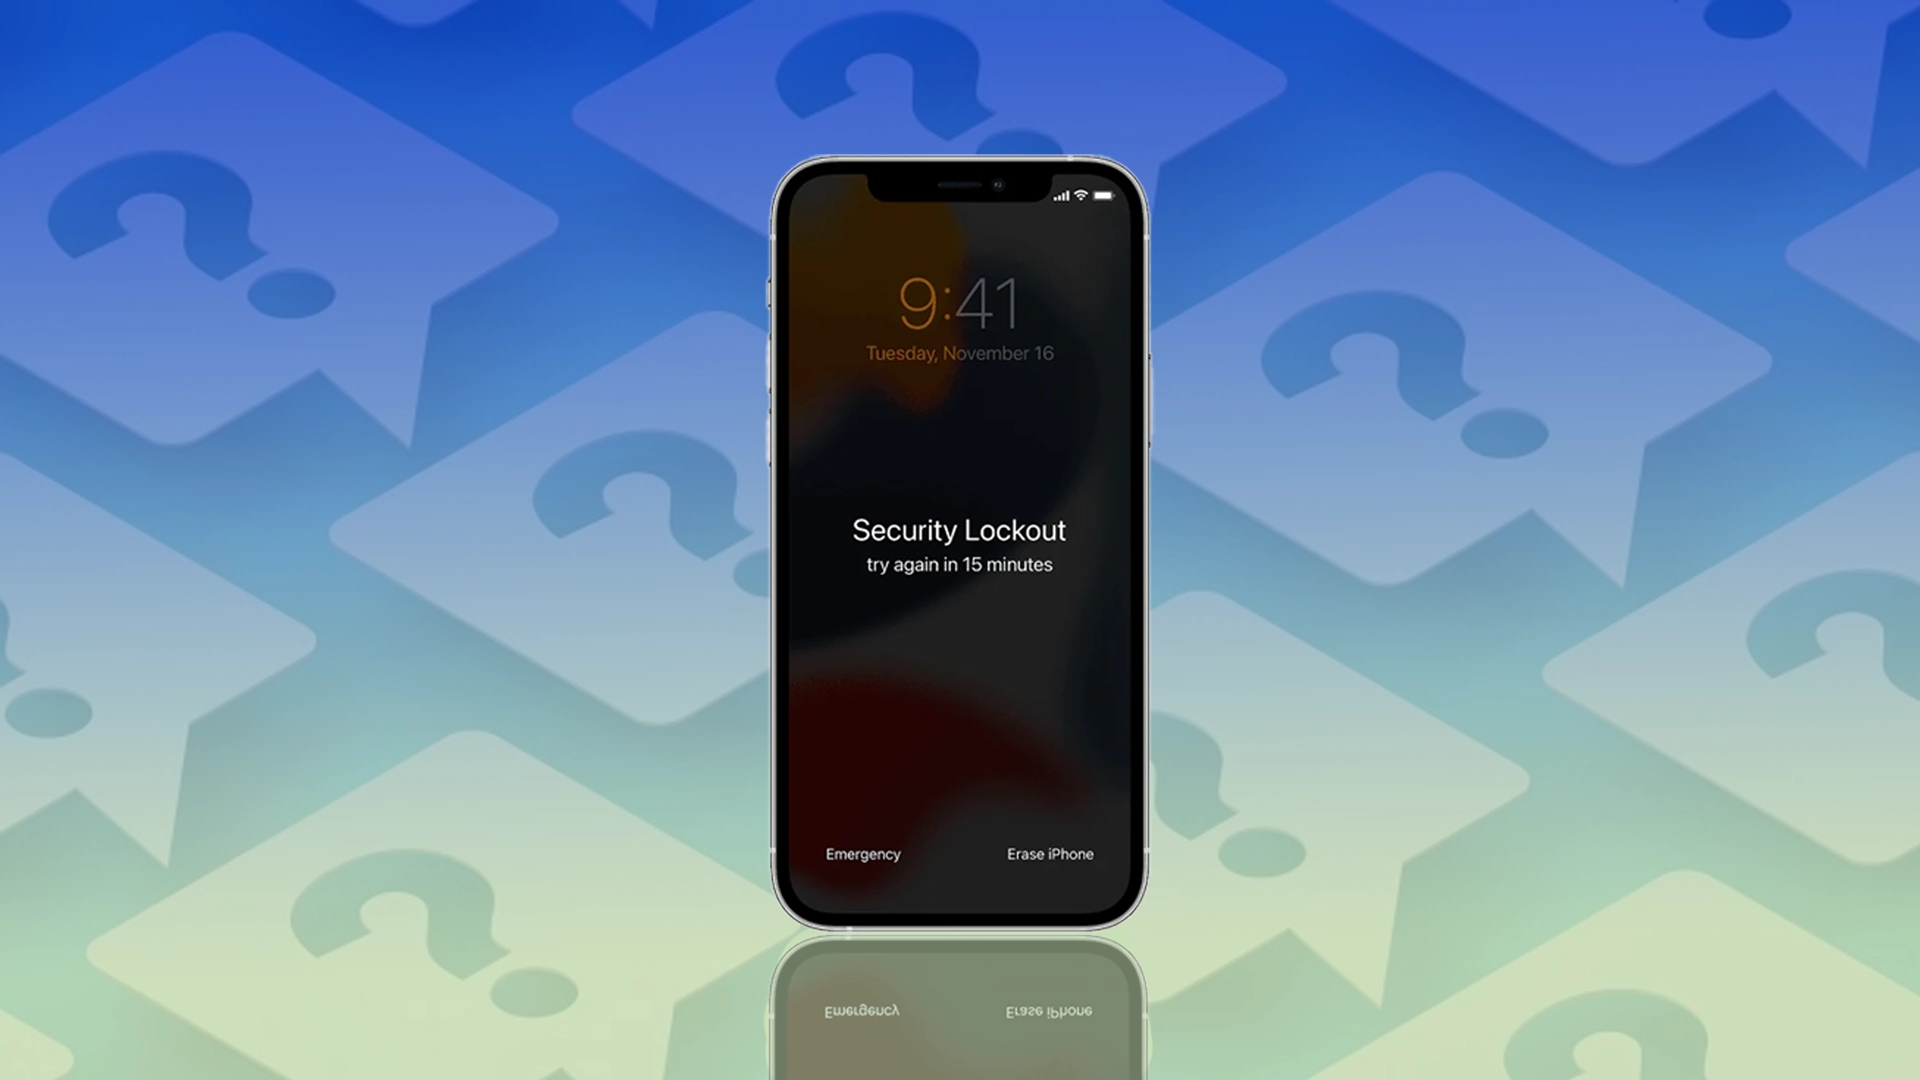 What does Security Lockout mean on iPhone